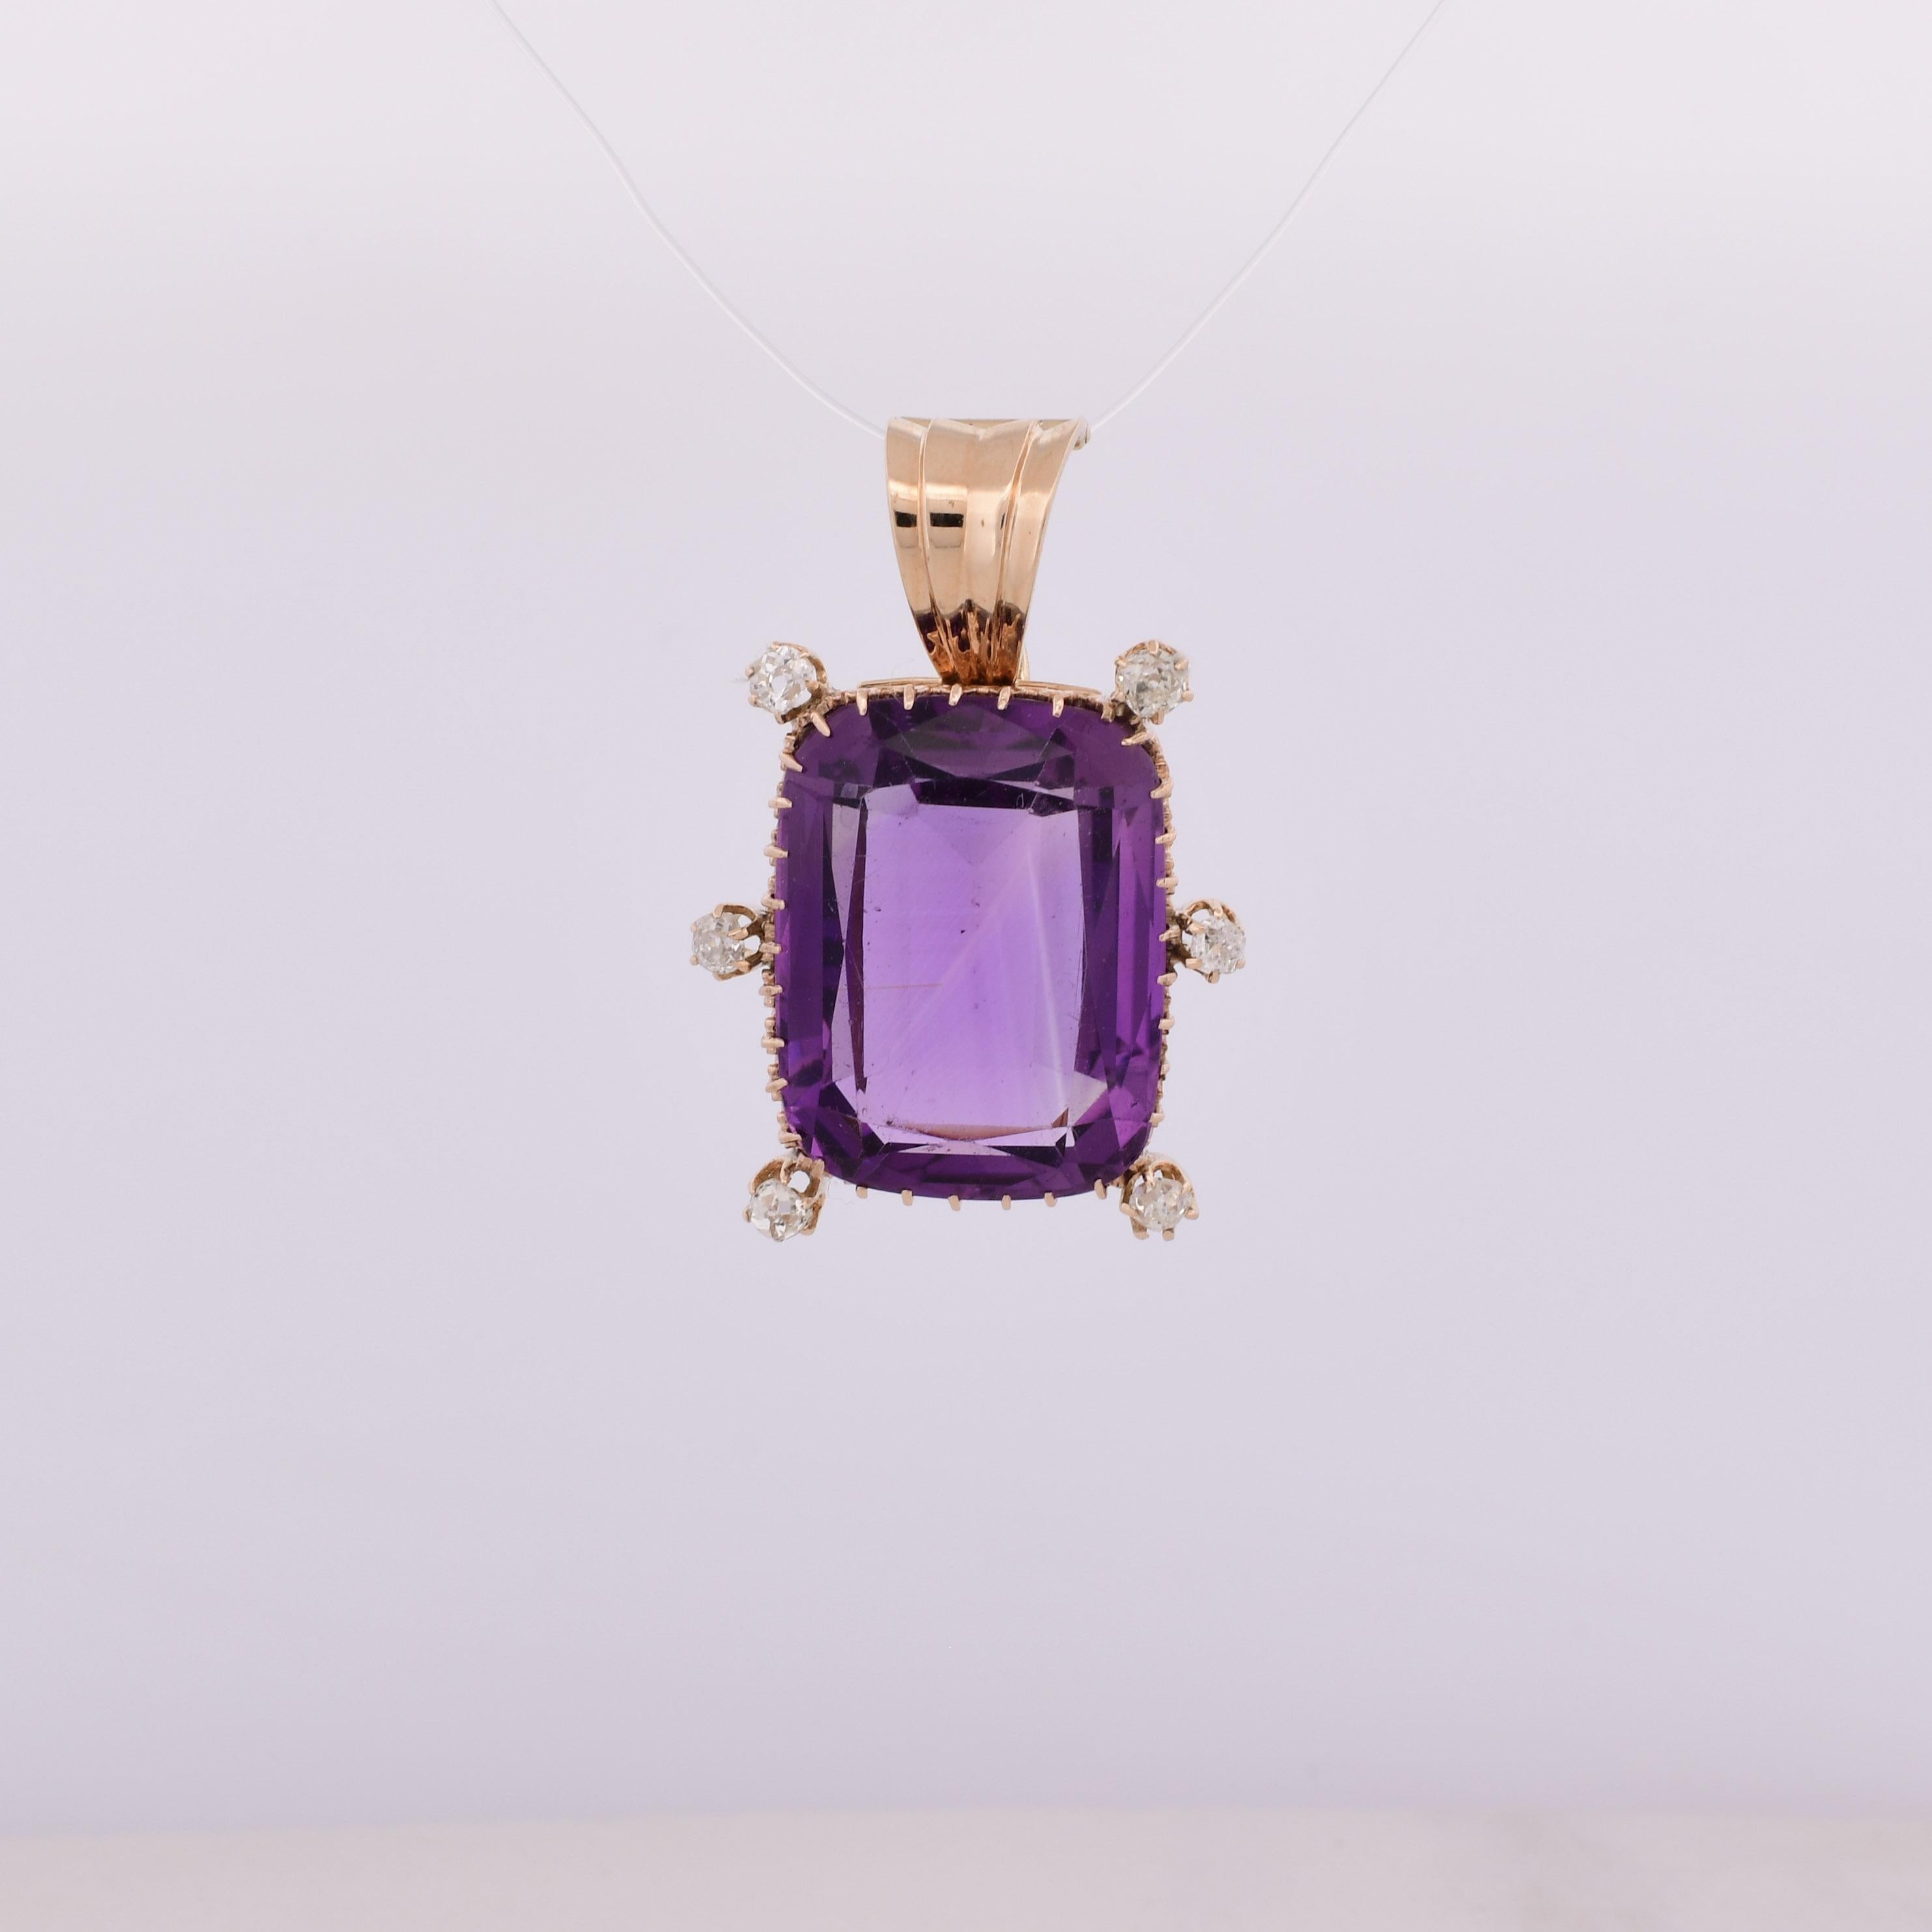 This Vintage Amethyst and Old Mine Cut Diamond 14K Gold Custom Pendant exudes timeless allure and sophistication. The rich, violet-hued amethyst gemstone commands attention, encircled by 6 meticulously crafted Old Mine cut diamonds that shimmer with